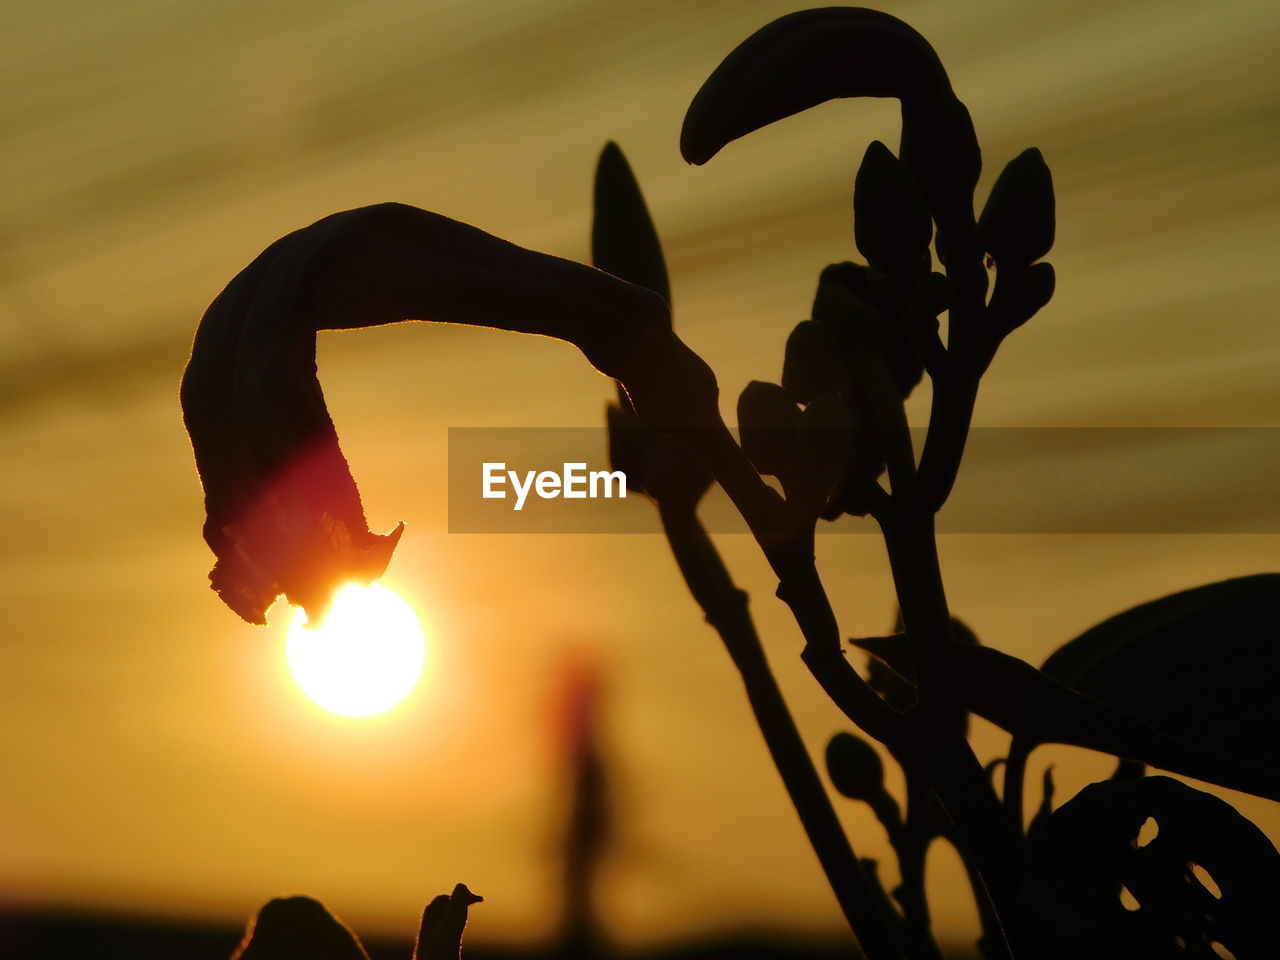 CLOSE-UP OF SILHOUETTE PLANT AGAINST SKY AT SUNSET